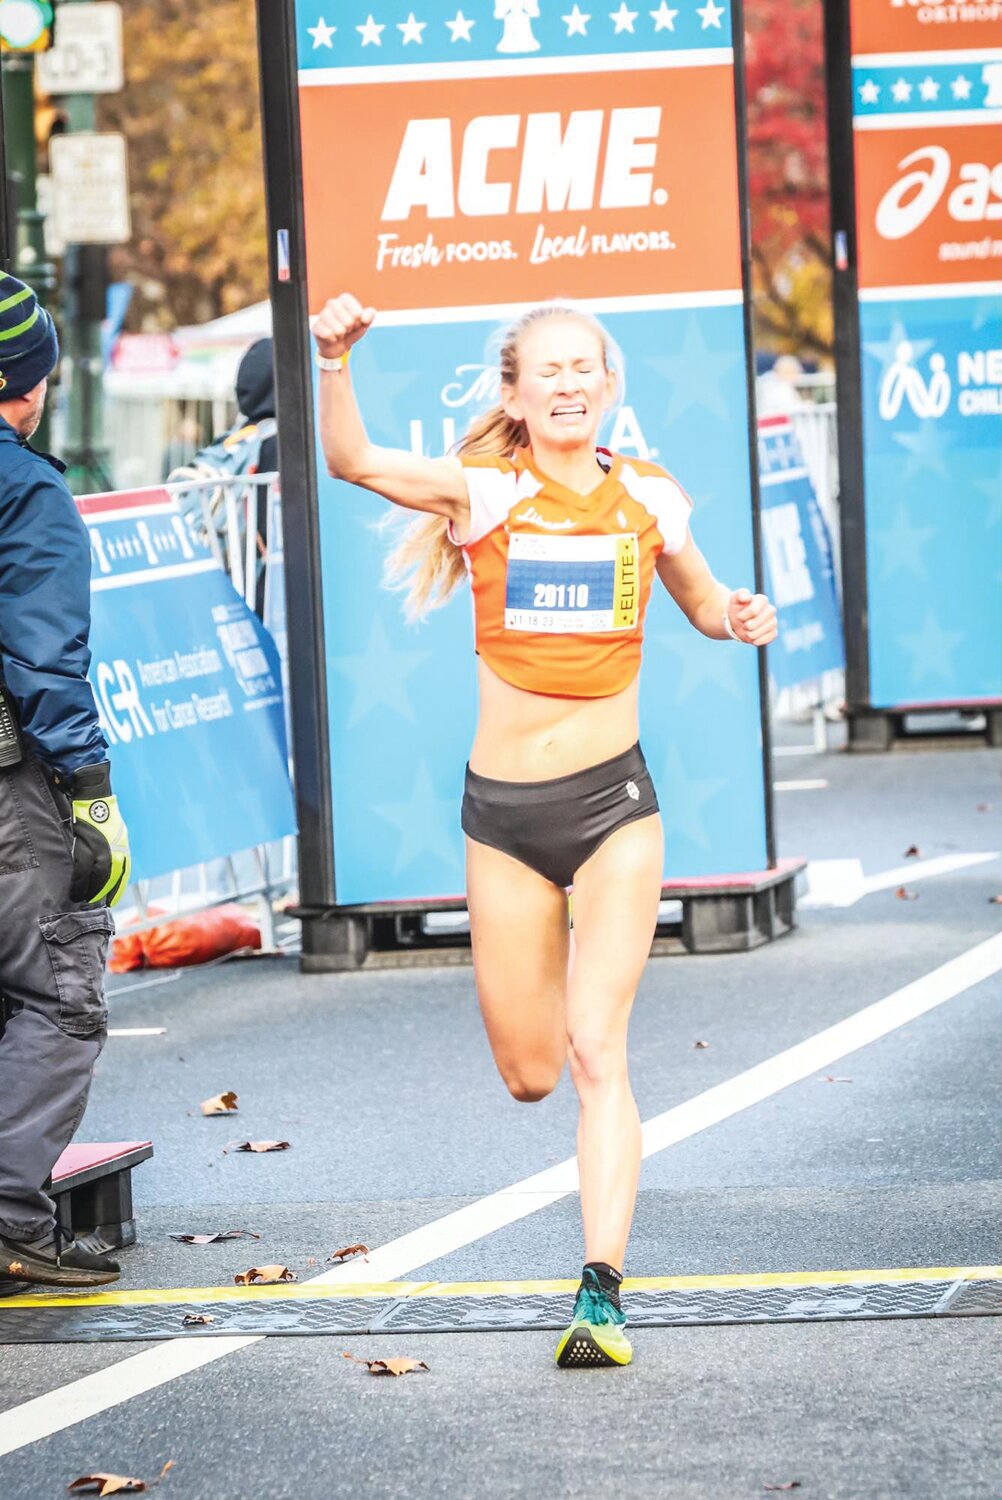 A time of 1:13 by Veronica Eder was fast enough for sixth place in the 2023 Philadelphia Half-Marathon.